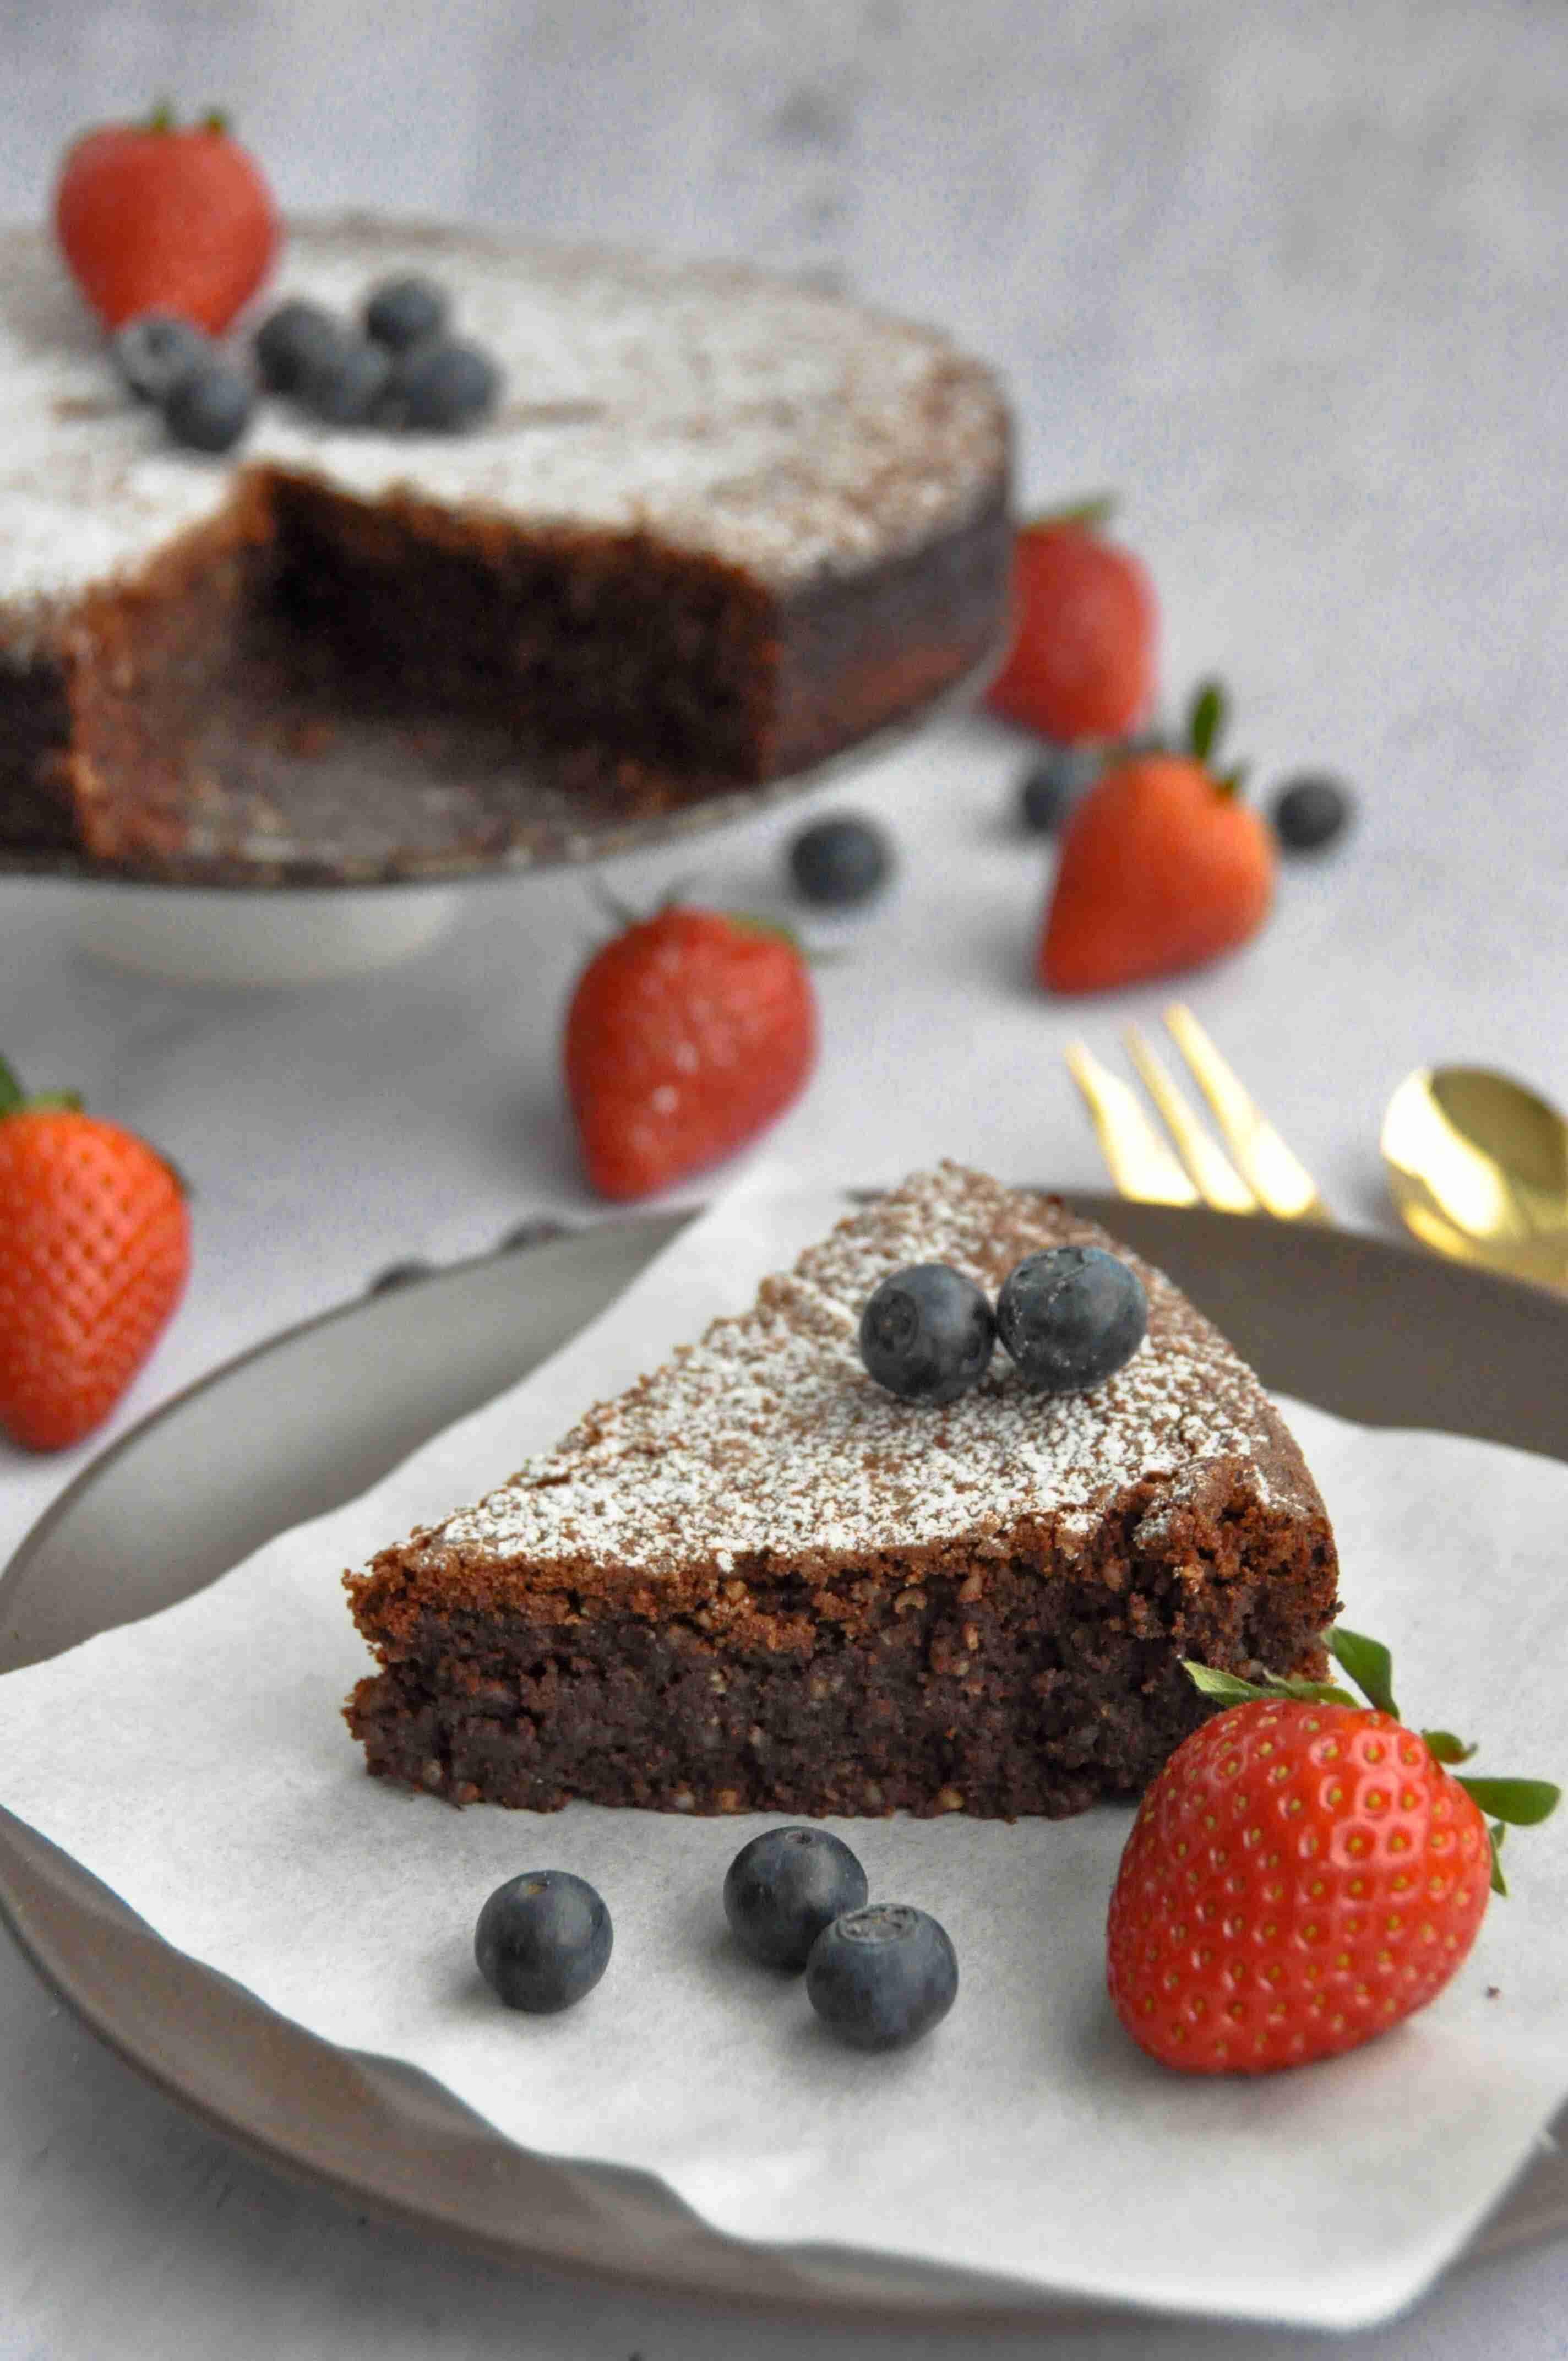 Slice of nutty chocolate cake on a serviette with berries